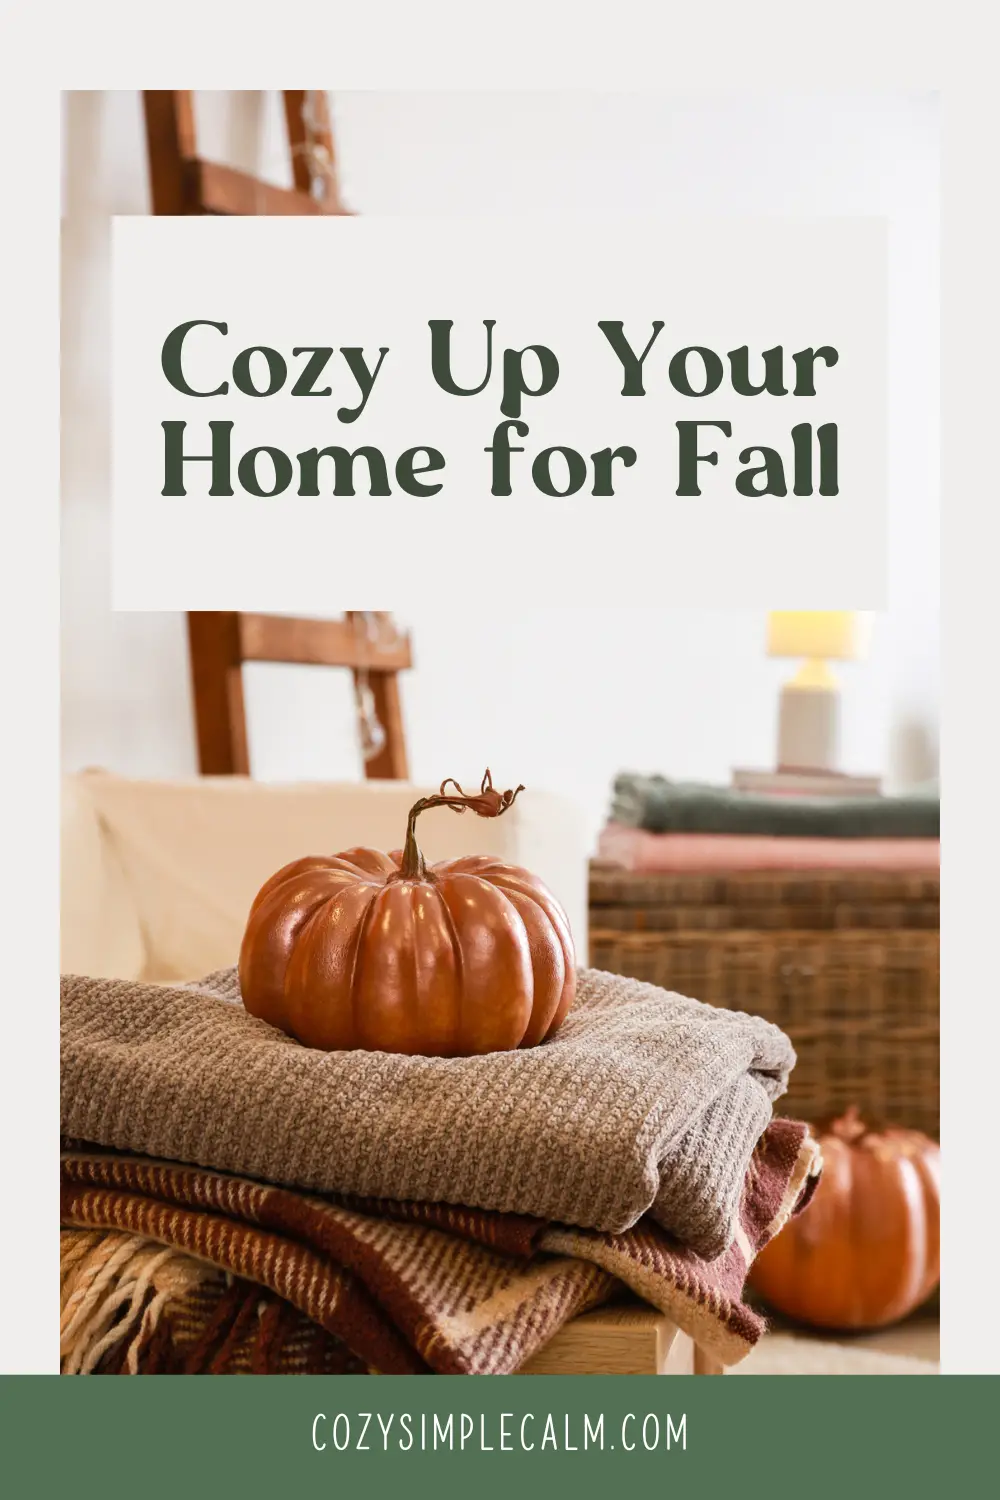 Image of ceramic pumpkin sitting on stacked fall blankets - Text overlay: Cozy up your home for fall - cozysimplecalm.com